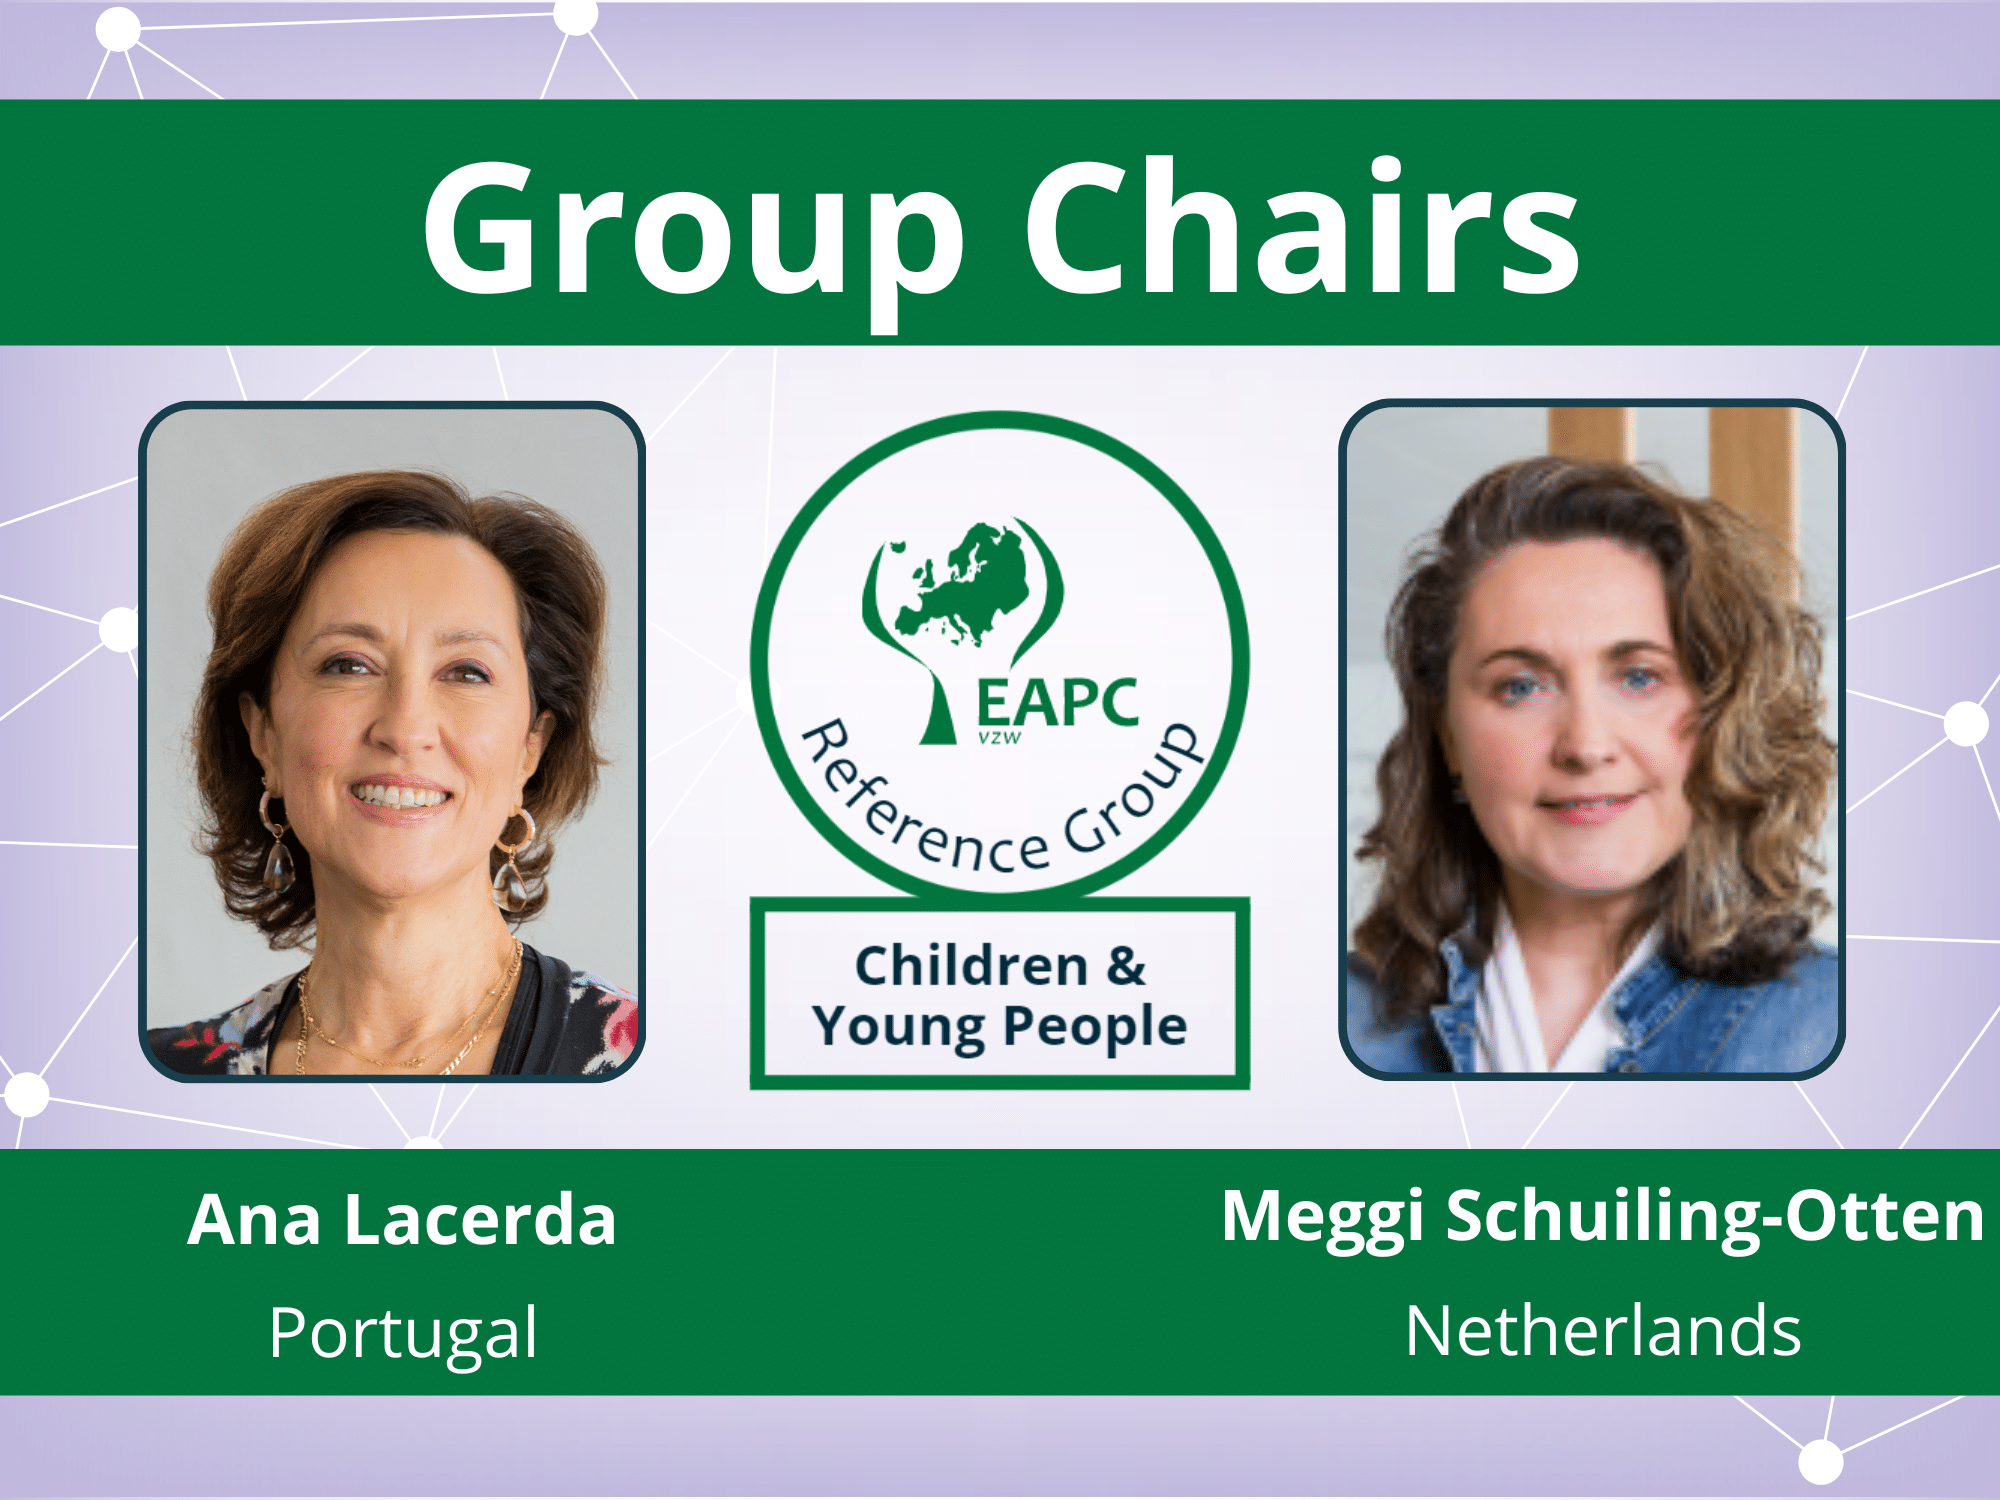 group chairs children and young people Ana Lacerda and Meggi Schuiling-Otten